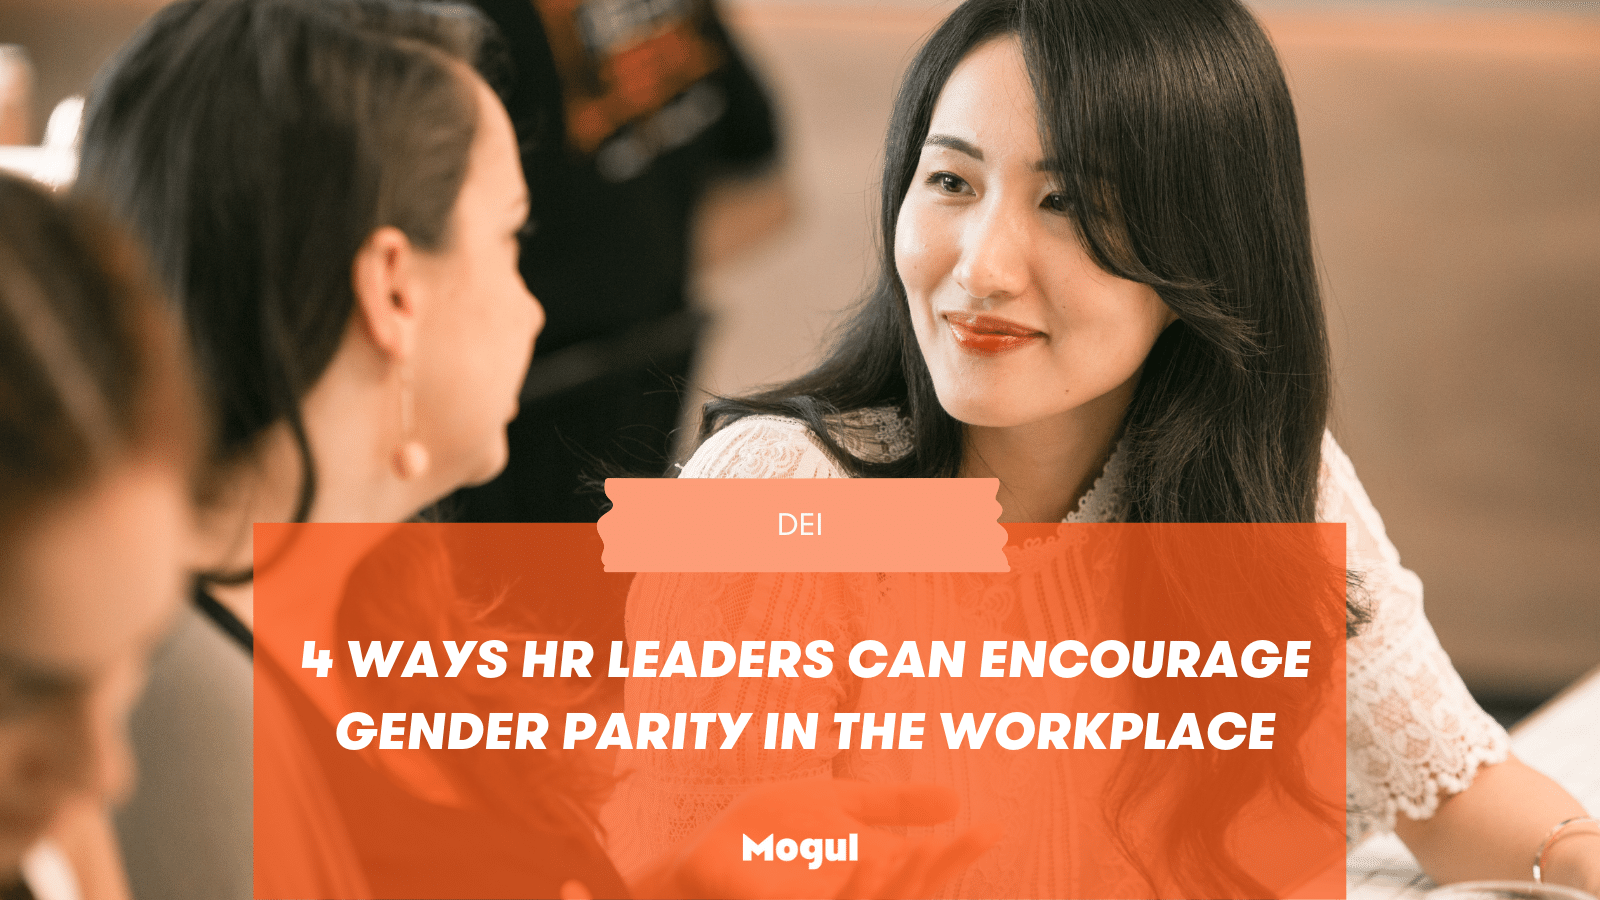 4 Ways HR Leaders Can Encourage Gender Parity In The Workplace